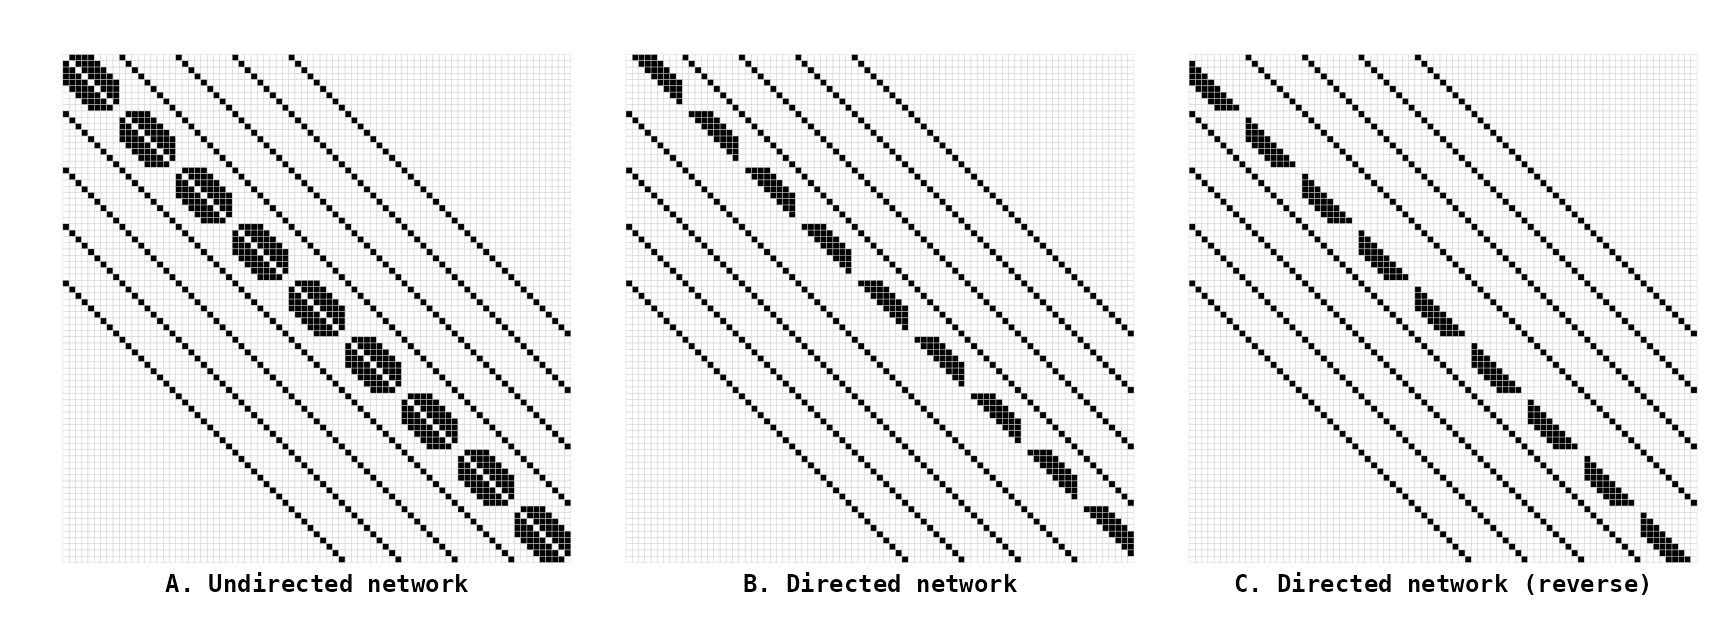 Figure 6. Connectivity matrices of the **Rook** (with degree = 4)